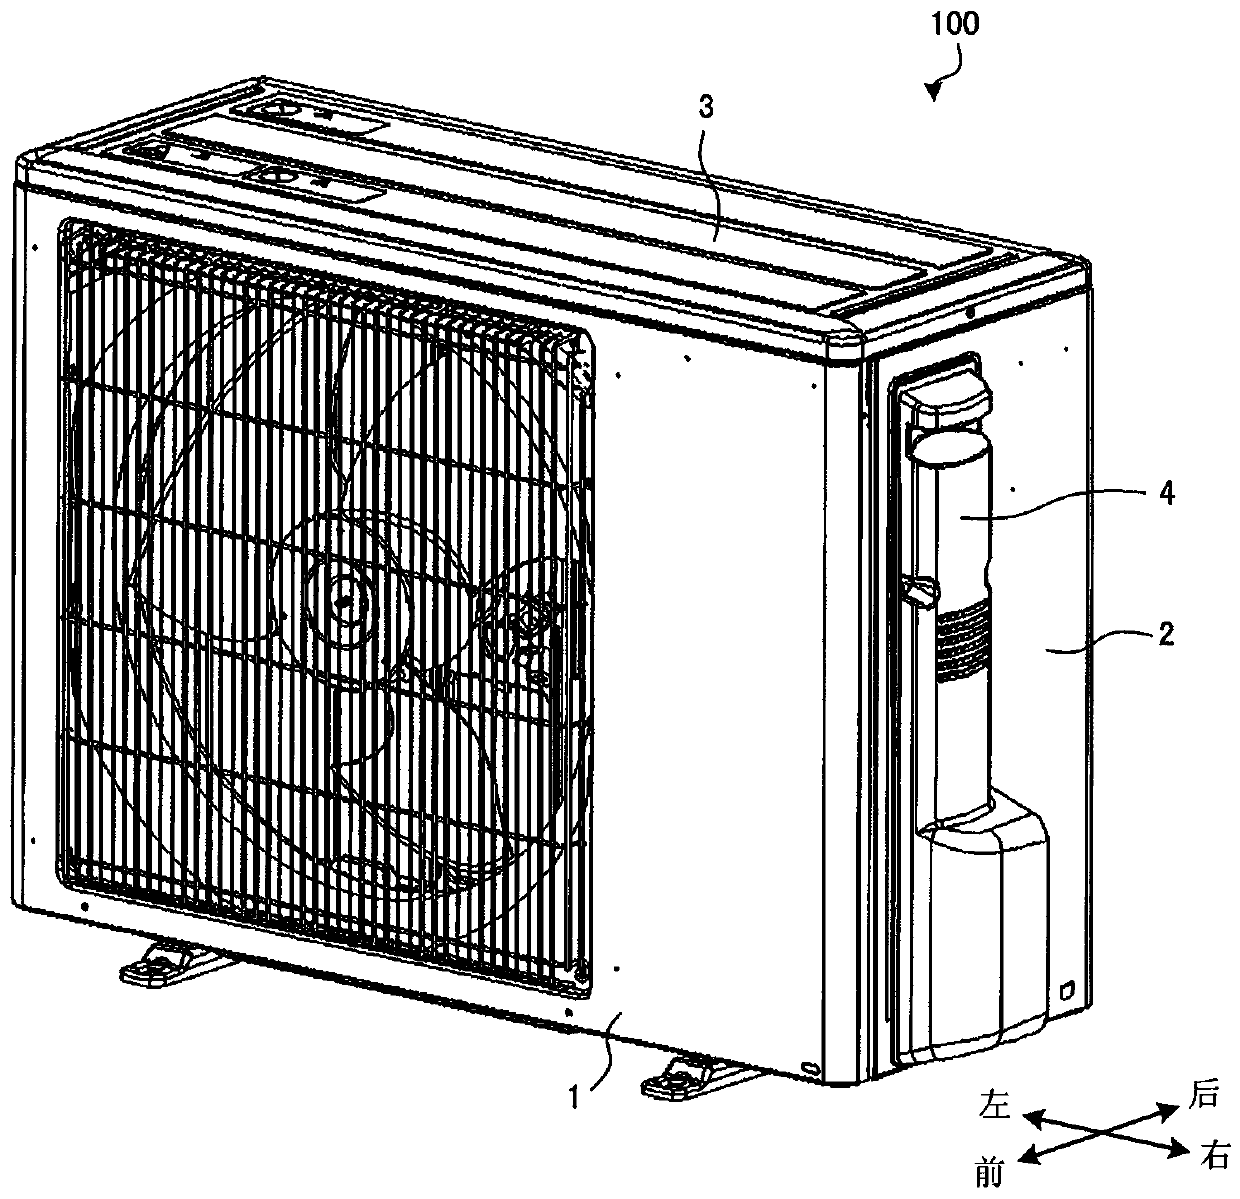 Outdoor unit of air conditioning device